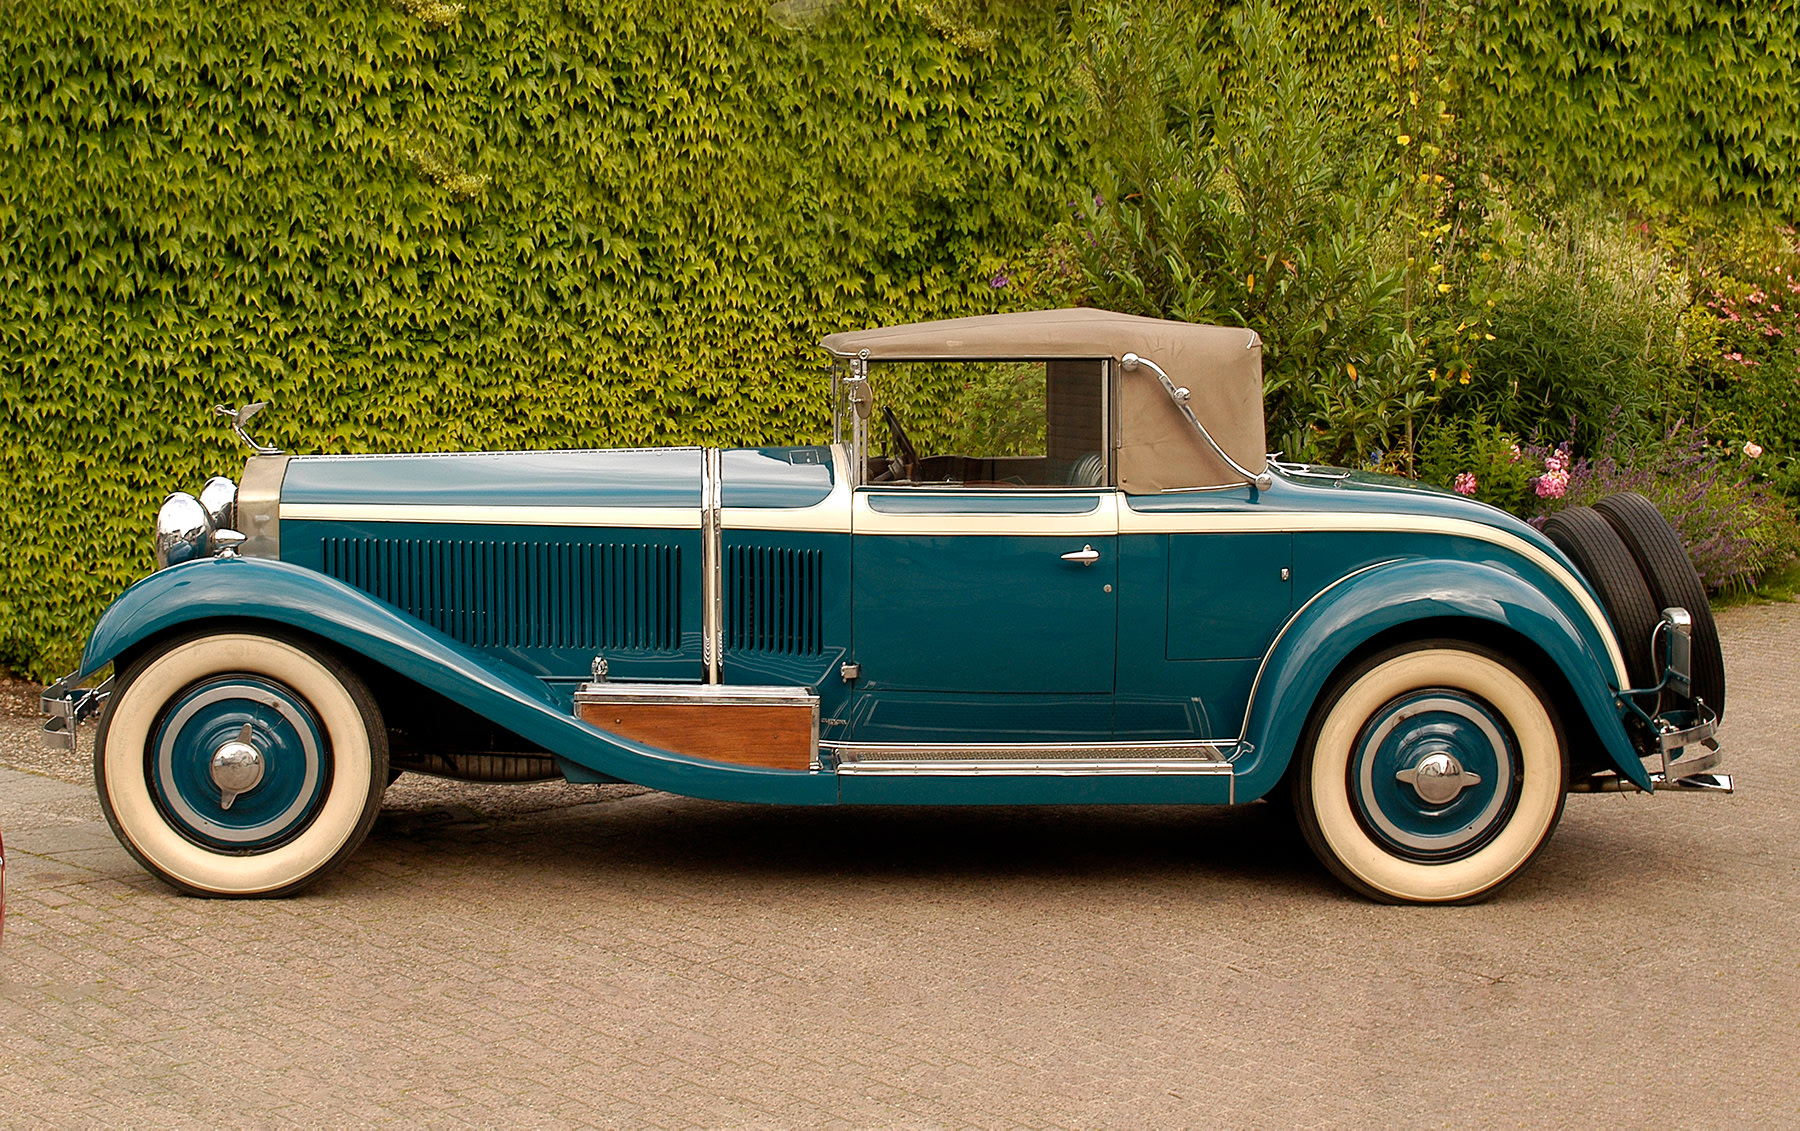 1929 Isotta-Fraschini 8A Commodore Roadster Cabriolet